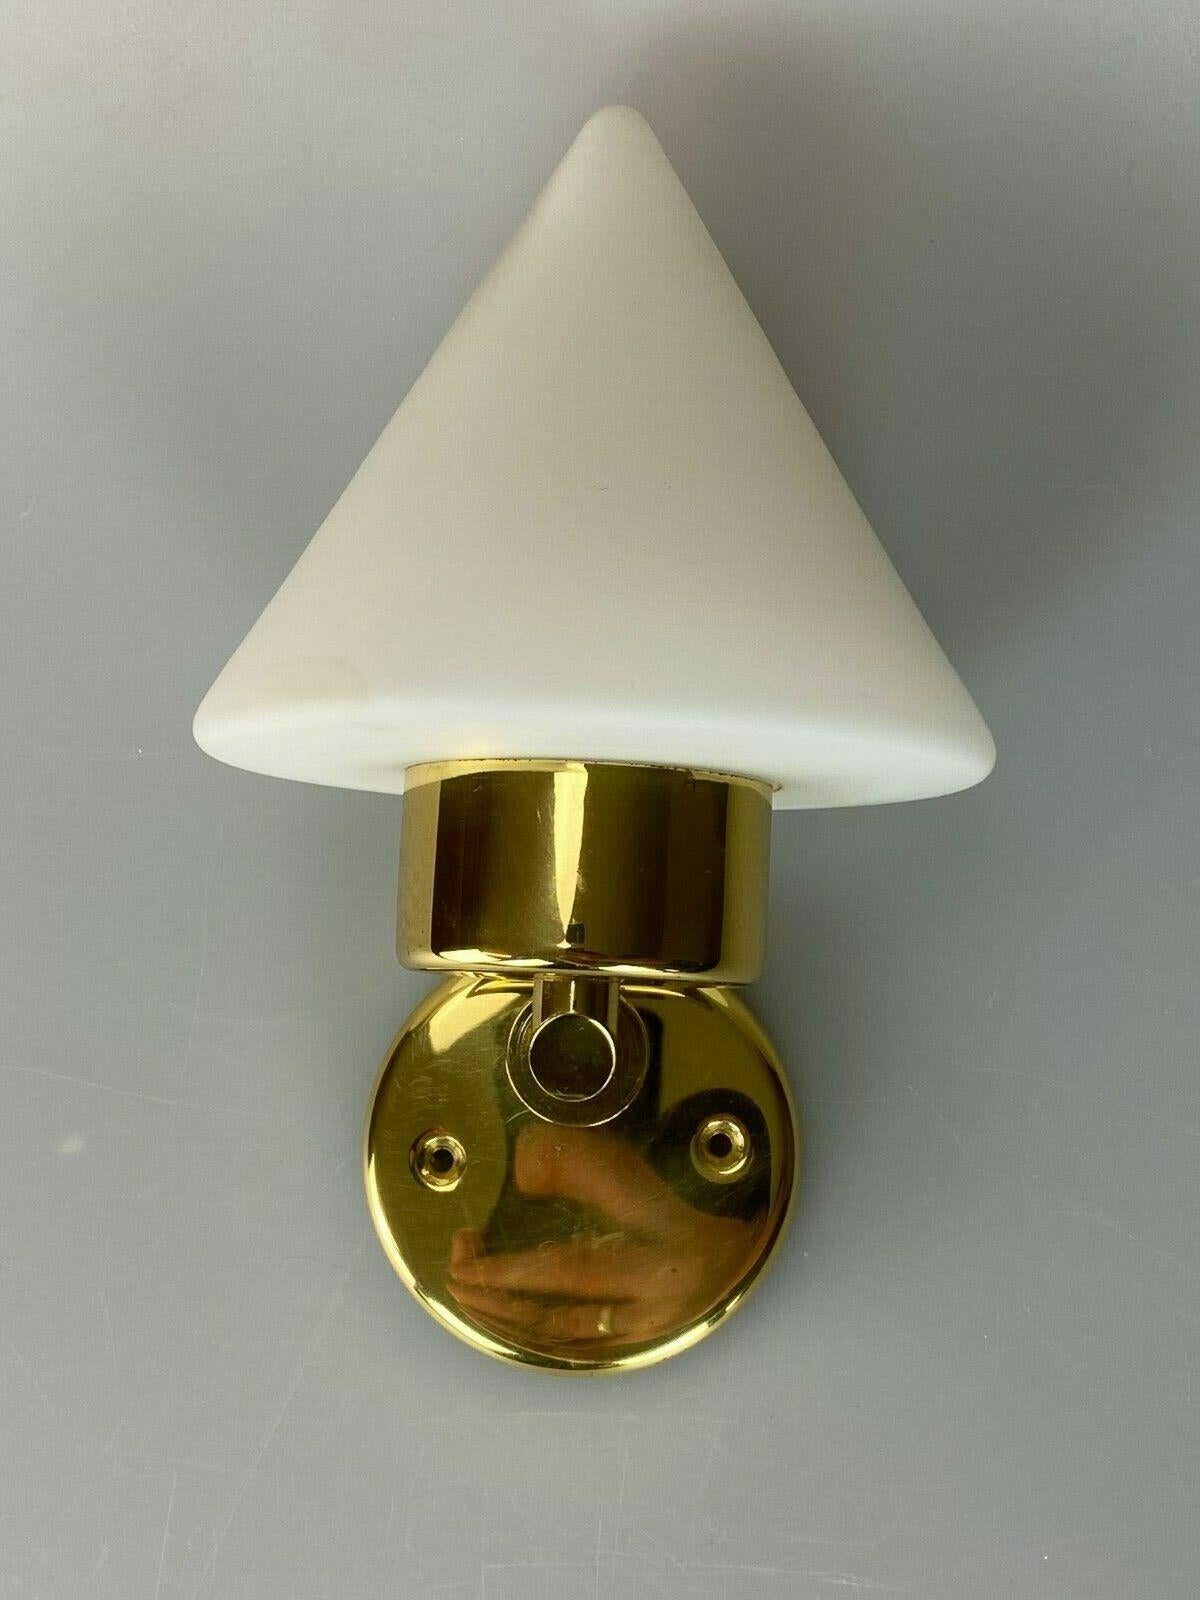 60s 70s lamp light wall lamp Limburg Plafoniere Space Age Design 60s

Object: wall lamp

Manufacturer: EH

Condition: good

Age: around 1960-1970

Dimensions:

12.5cm x 22cm x 13cm

Other notes:

The pictures serve as part of the